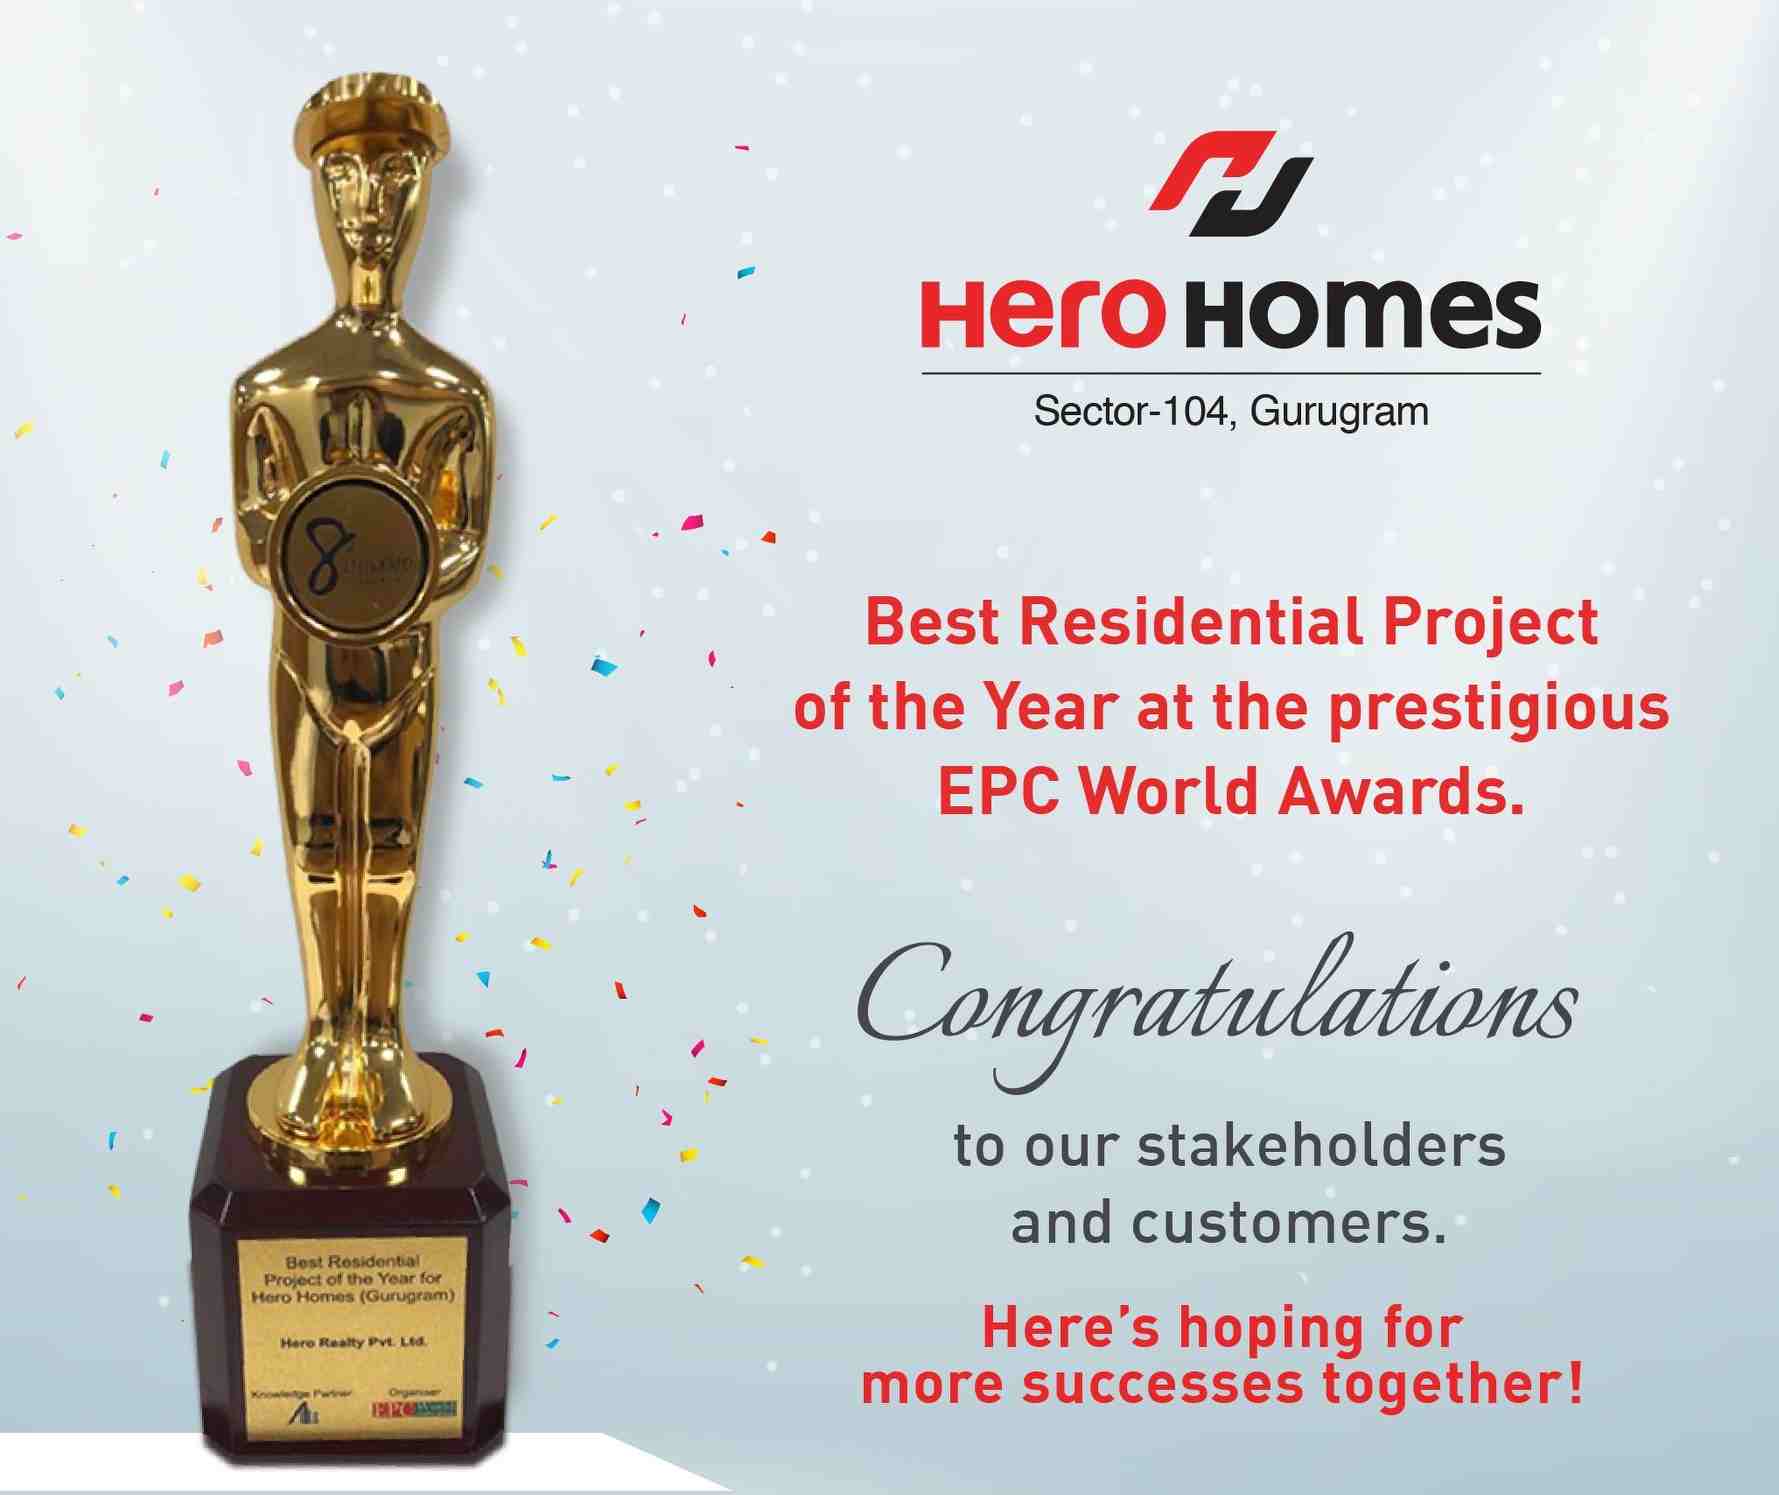 Hero Homes in Gurgaon bagged Best Residential Project of the Year at prestigious EPC World Awards Update